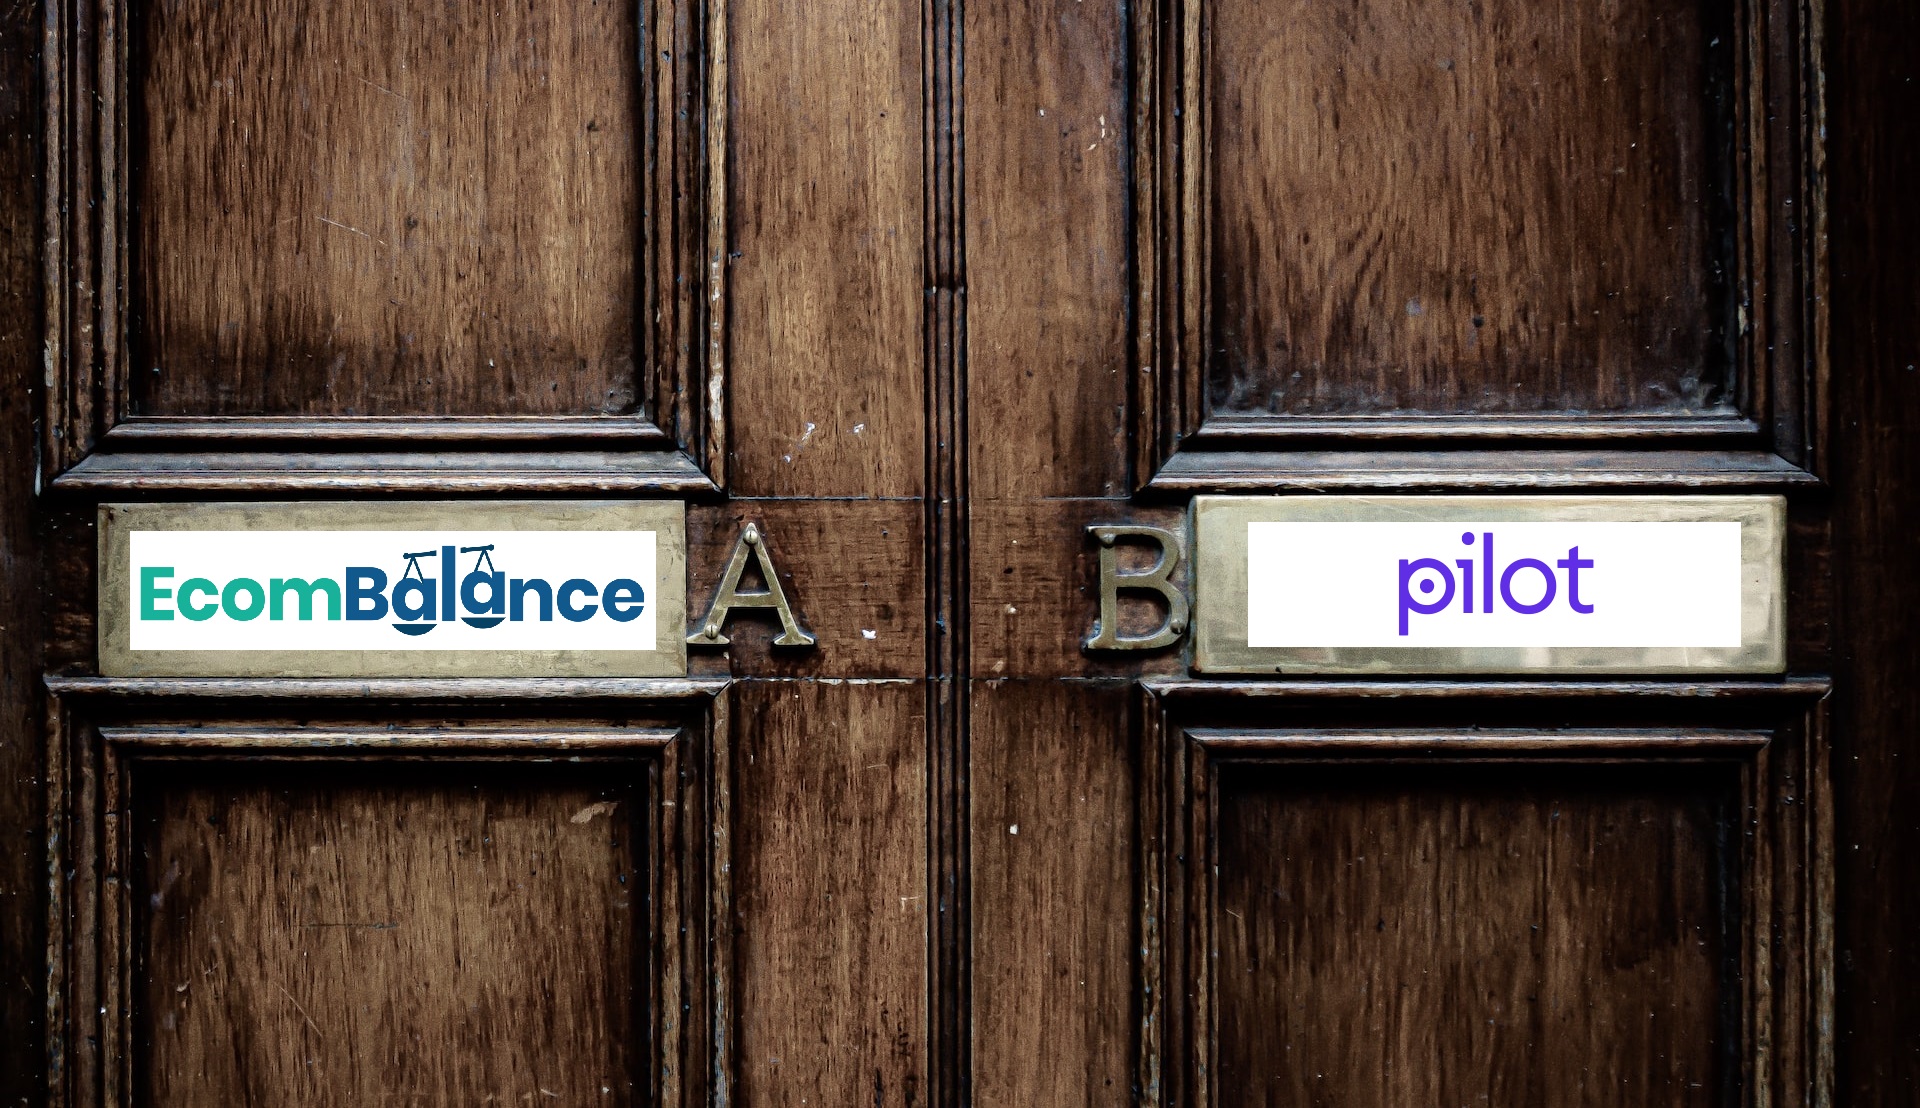 An image of two doors showing EcomBalance vs Pilot.